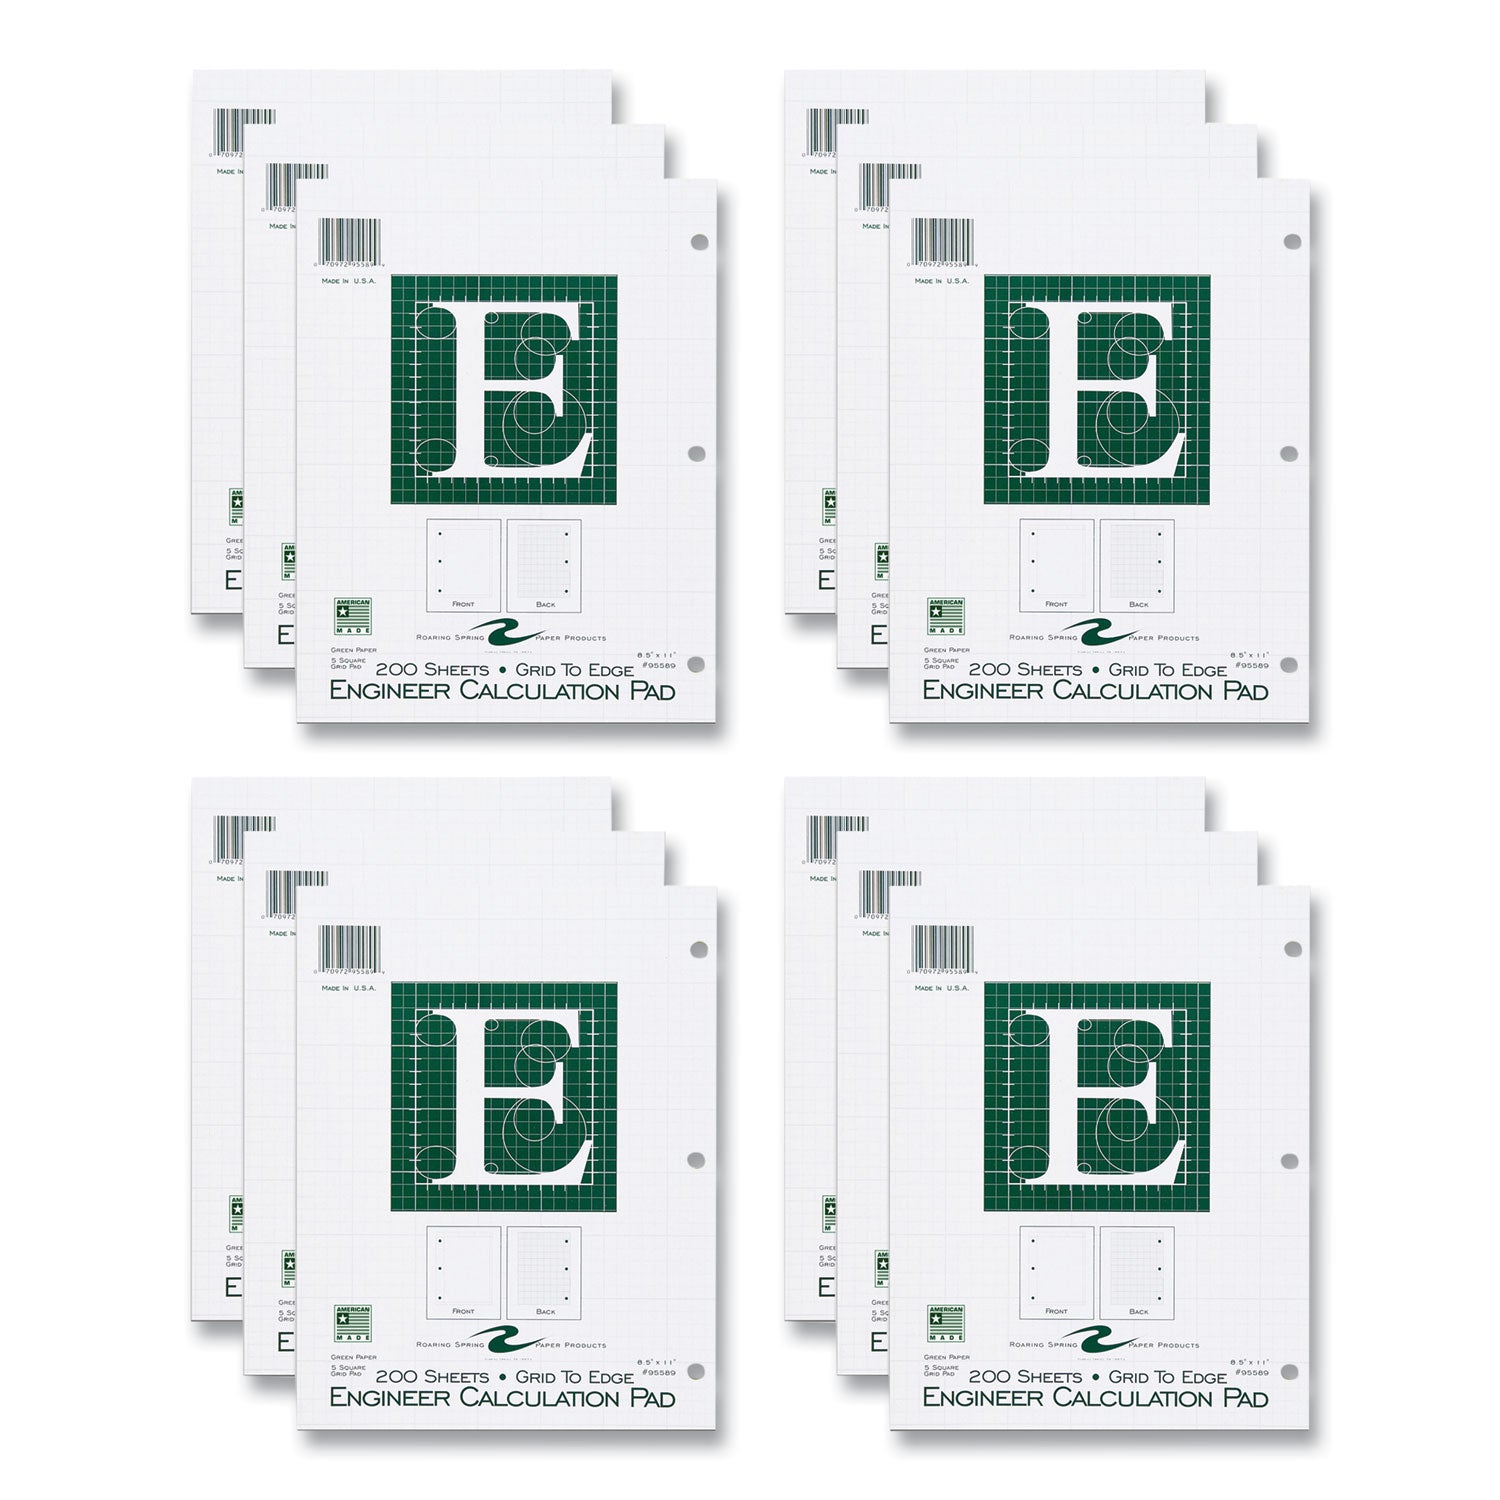 engineer-pad-125-margin-quad-rule-5-sq-in-1-sq-in-200-lt-green-85x11-sheets-pad-12-ct-ships-in-4-6-business-days_roa95589cs - 1